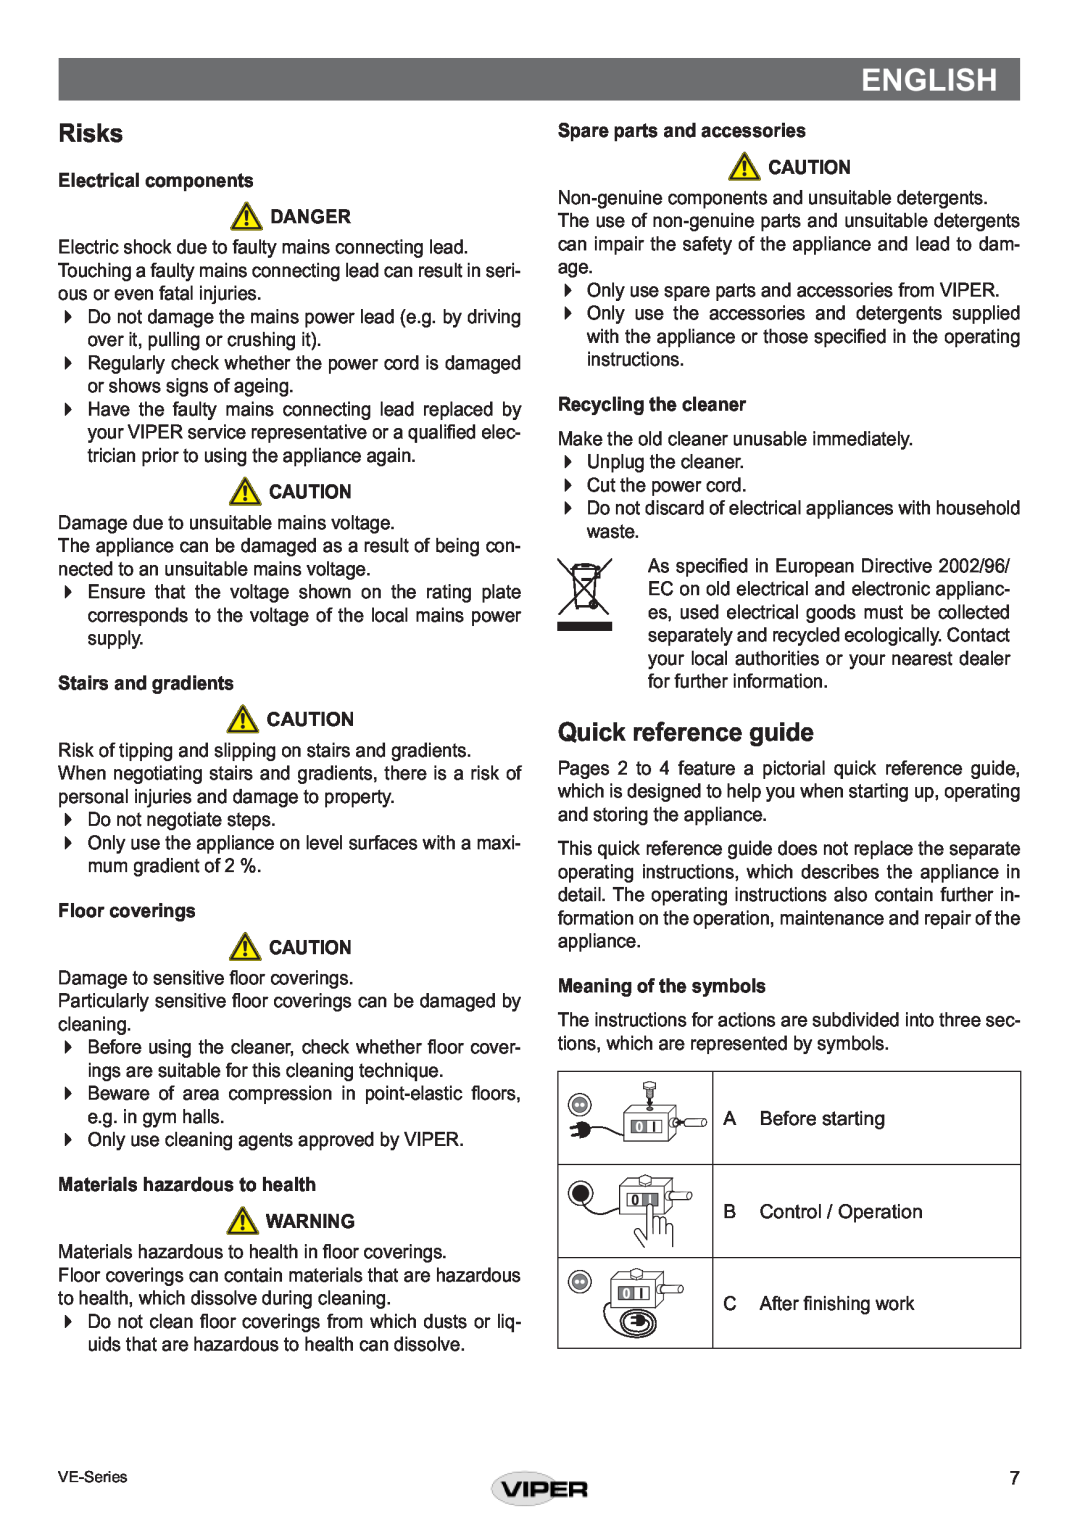 Viper VE 17 P Risks, Quick reference guide, Electrical components DANGER, Stairs and gradients, Recycling the cleaner 